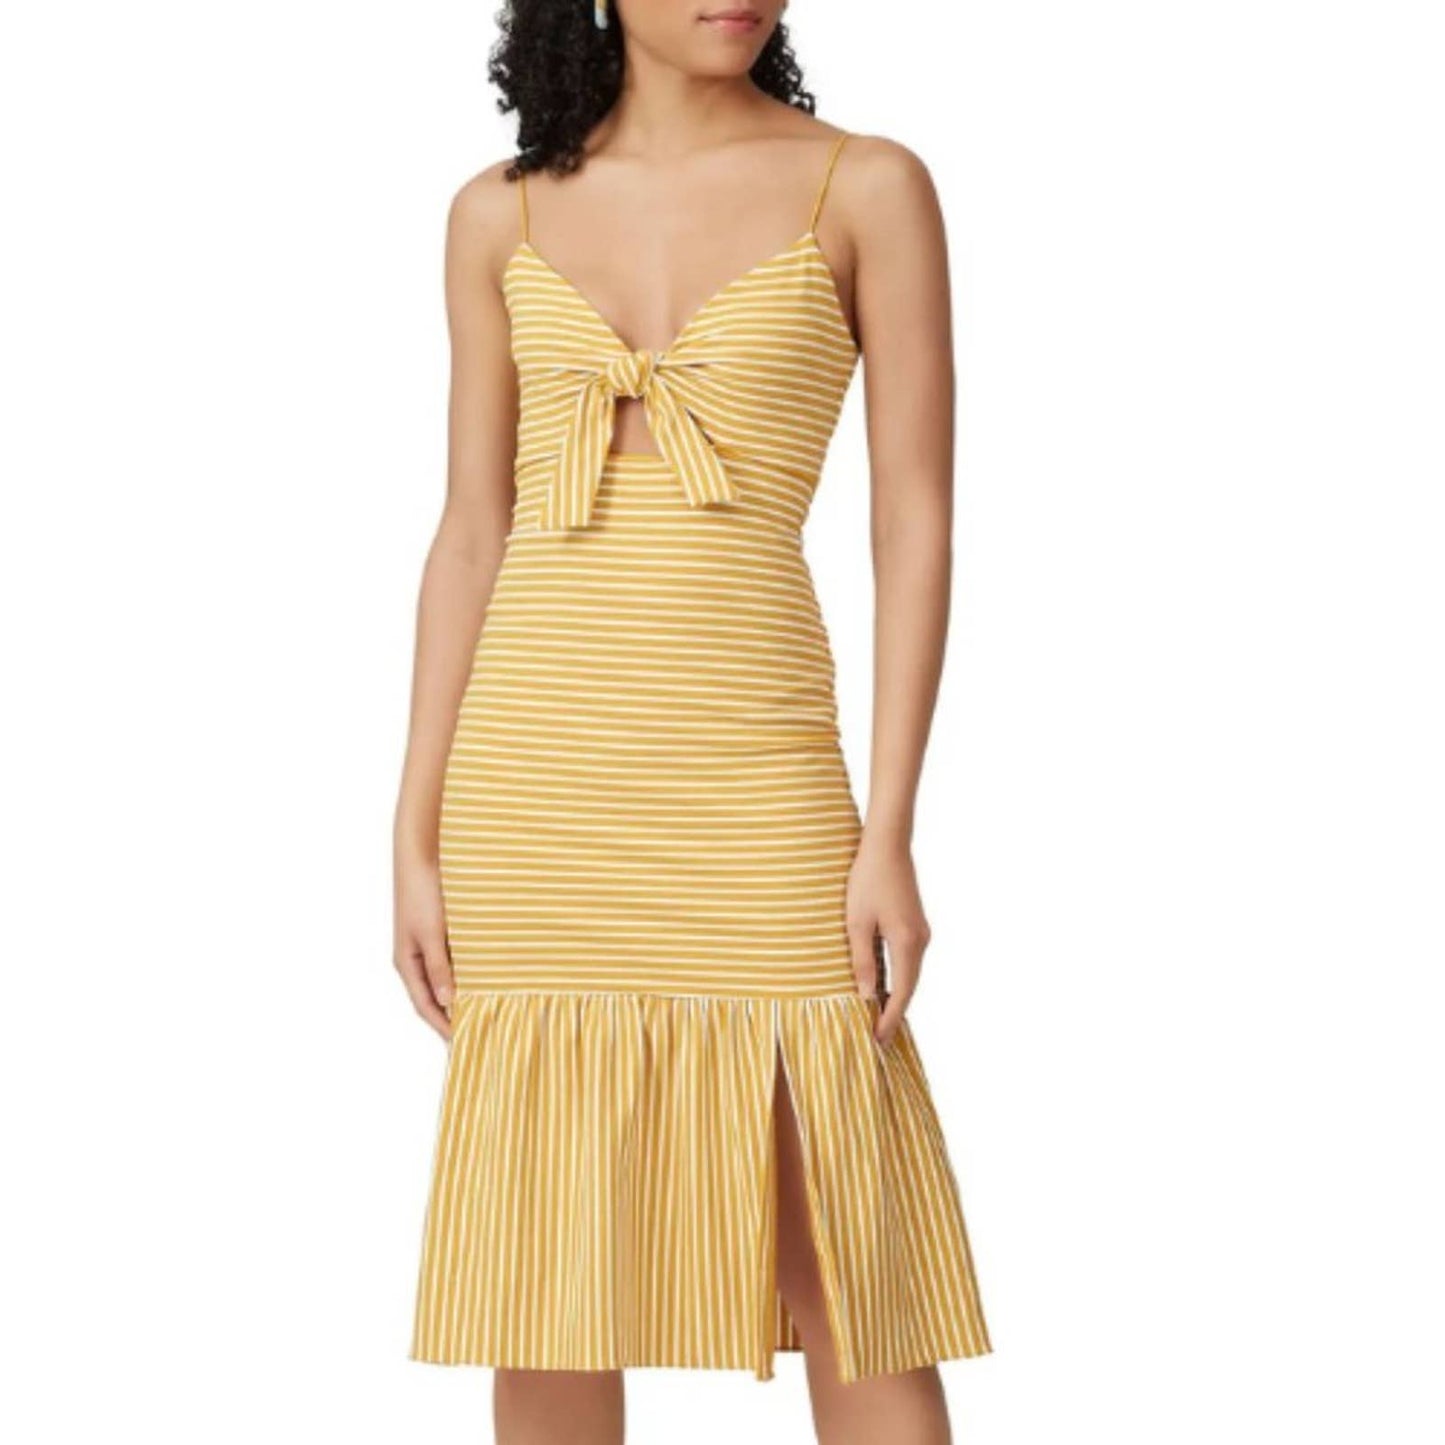 Saylor Doris Dress in Golden Yellow and White Stripe Size Small